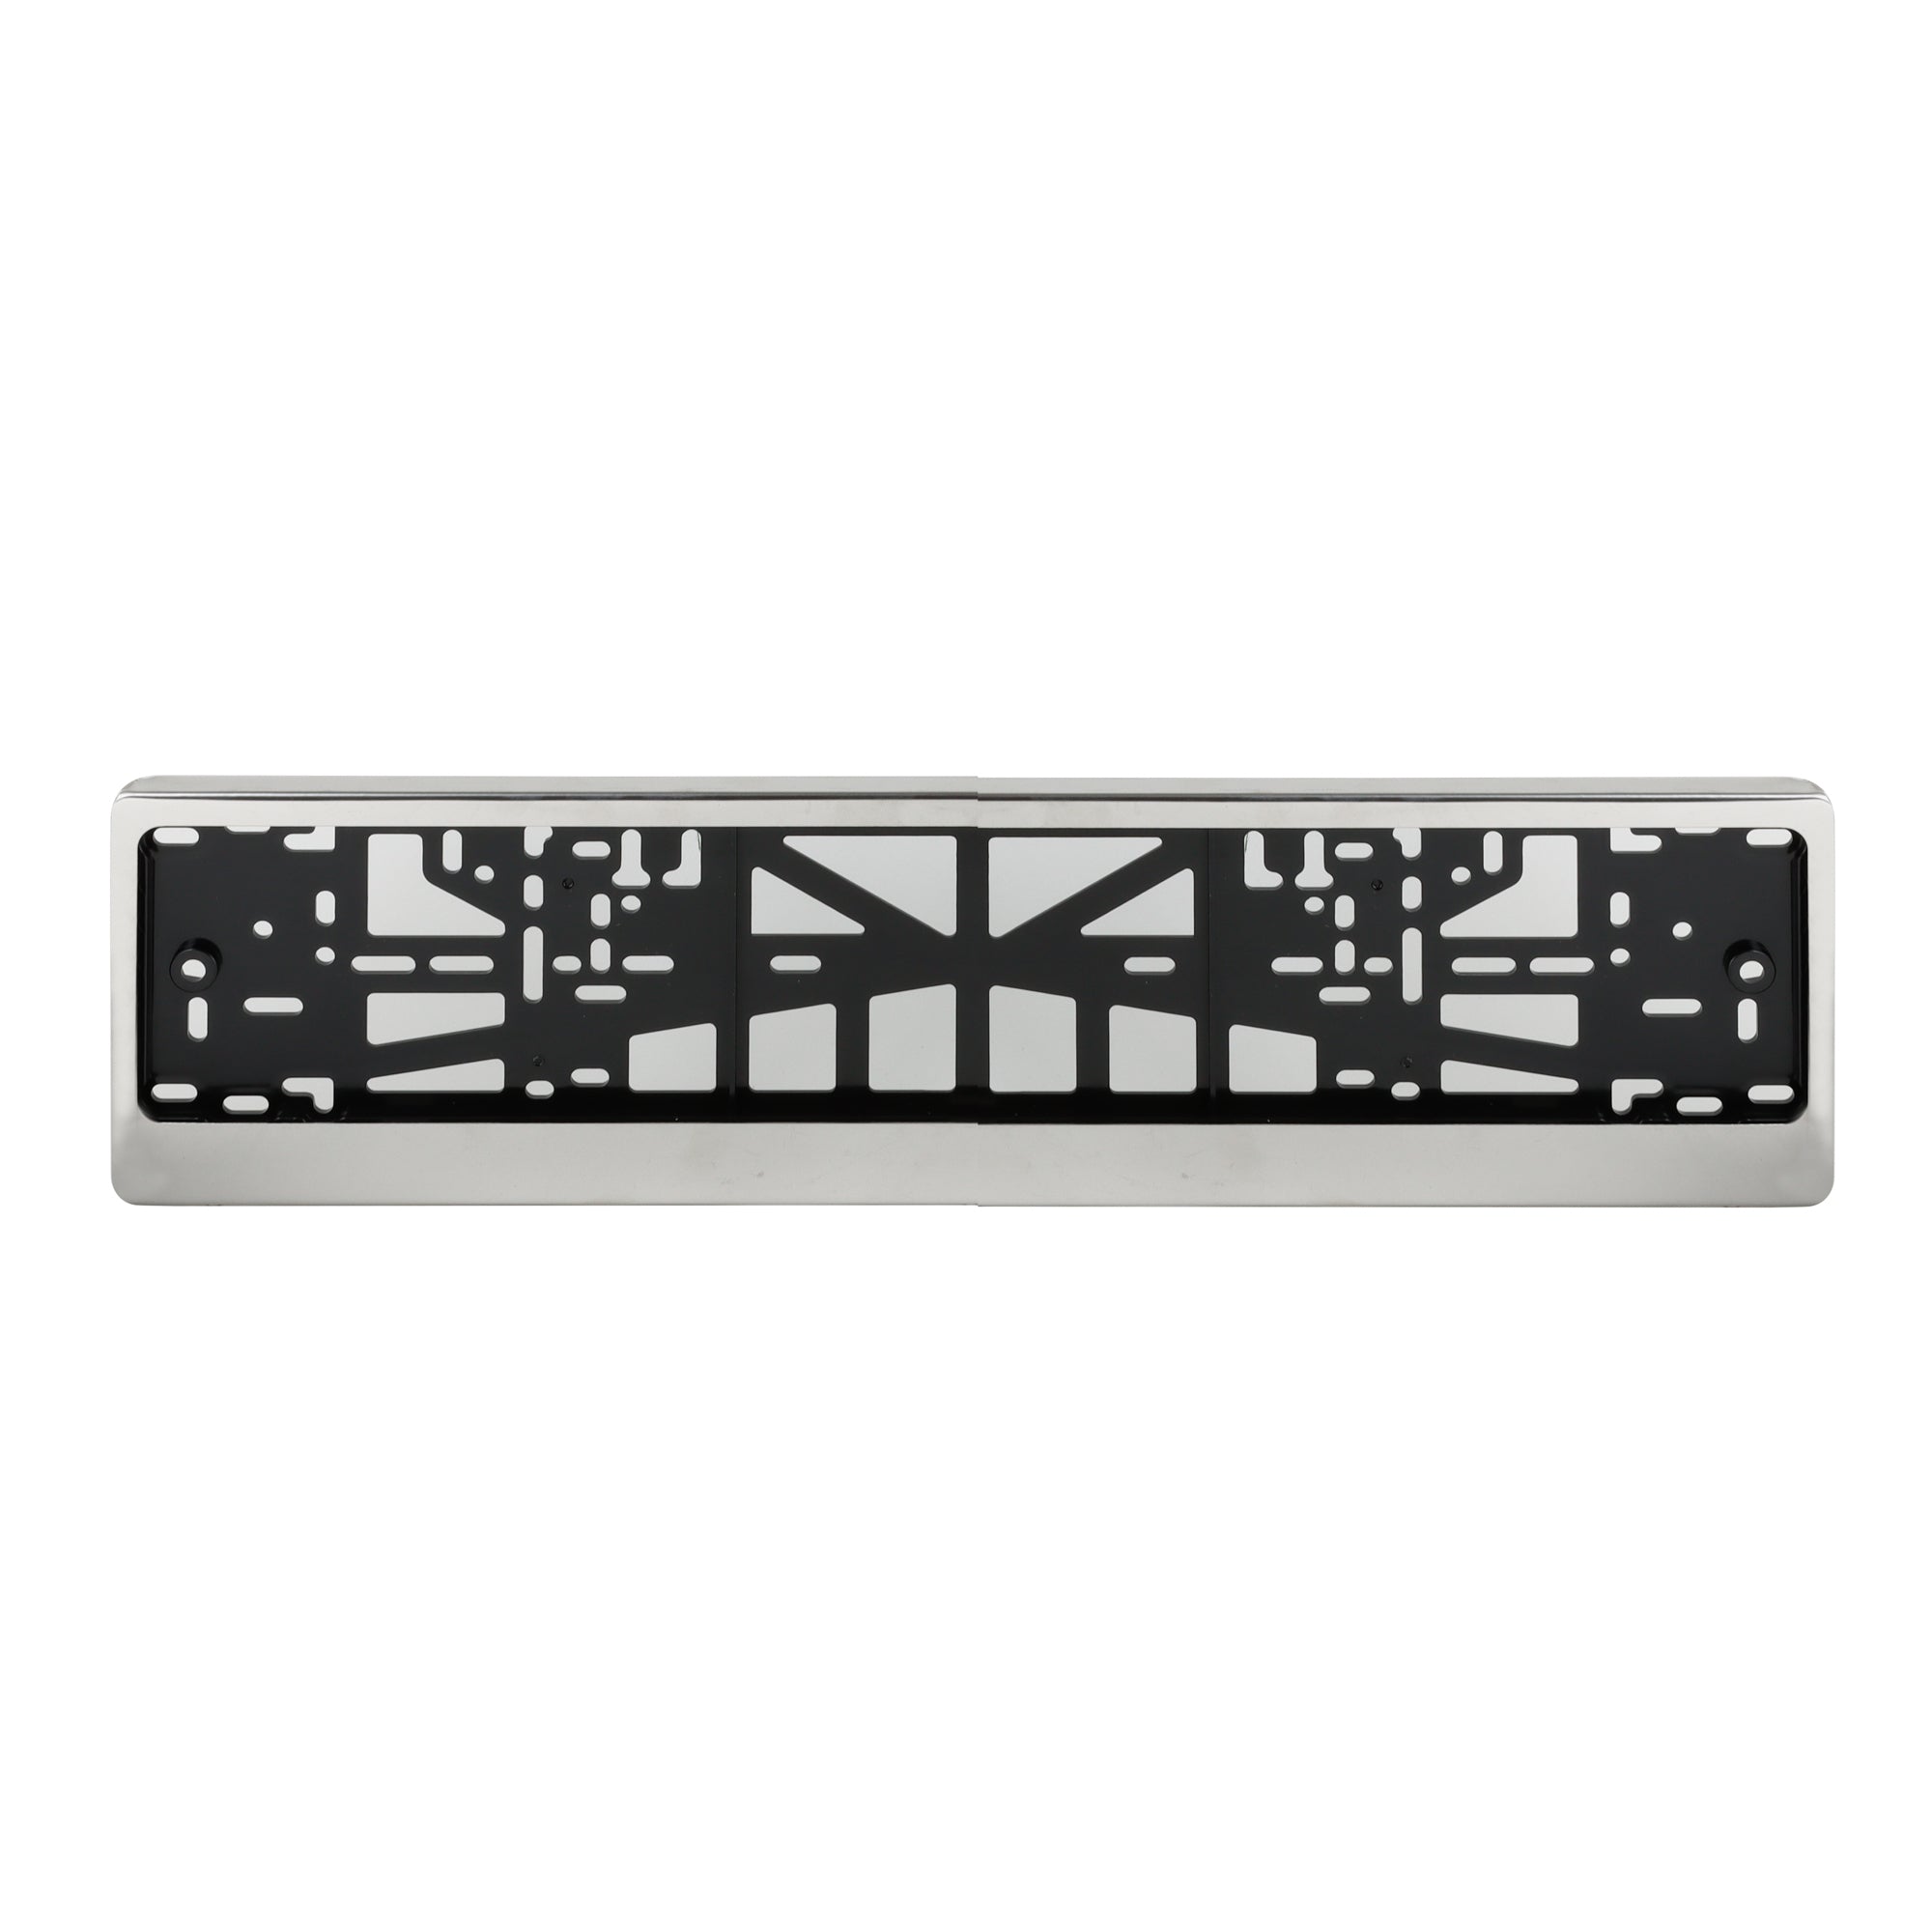 Streetwize Stainless Steel Number Plate Surround